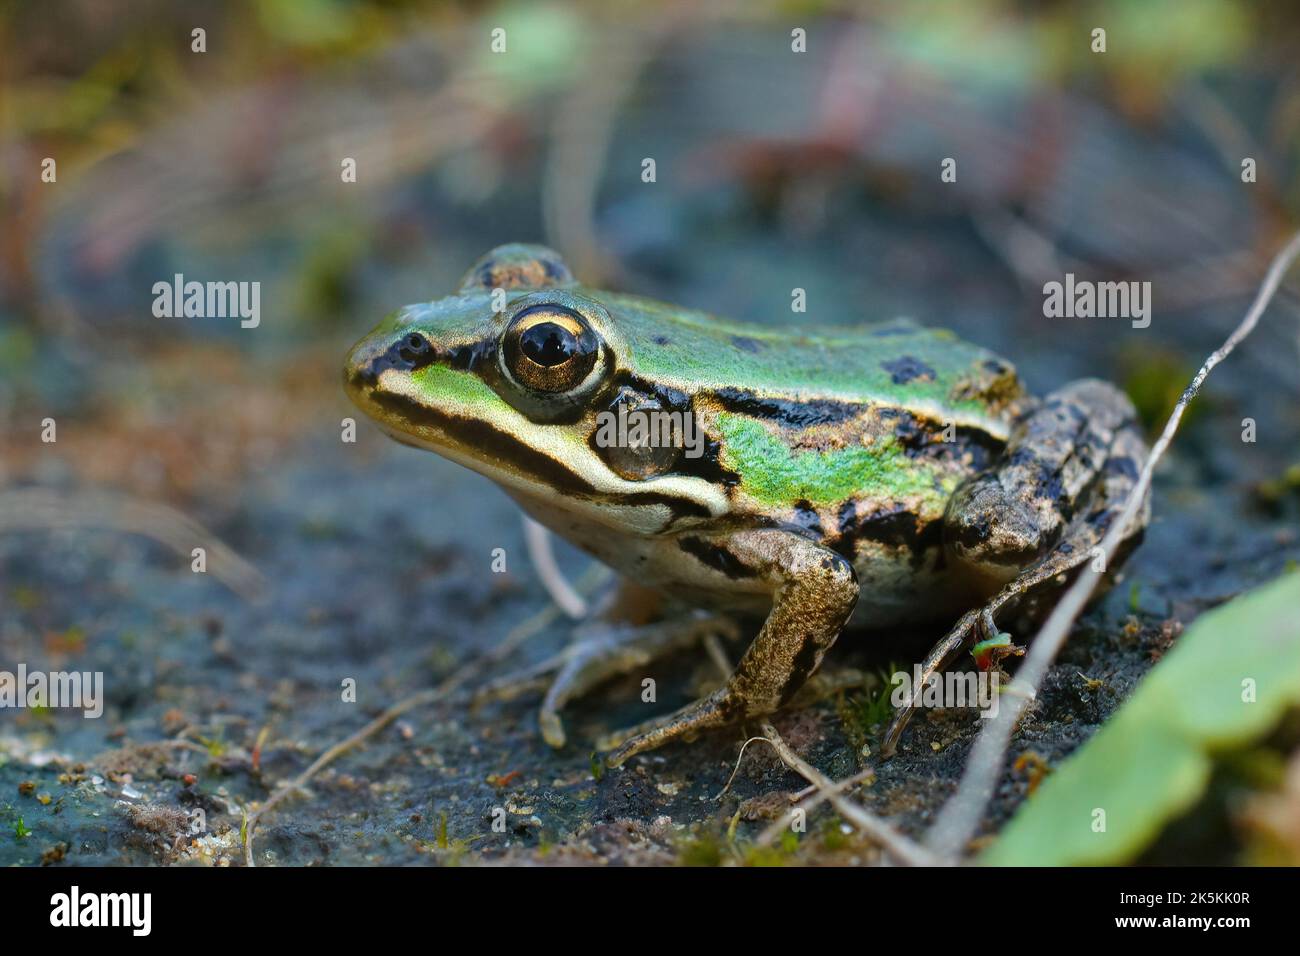 Detailed closeup on a colorful green sub-adult Marsh frog, Pelophylax ridibundus sitting on the ground Stock Photo